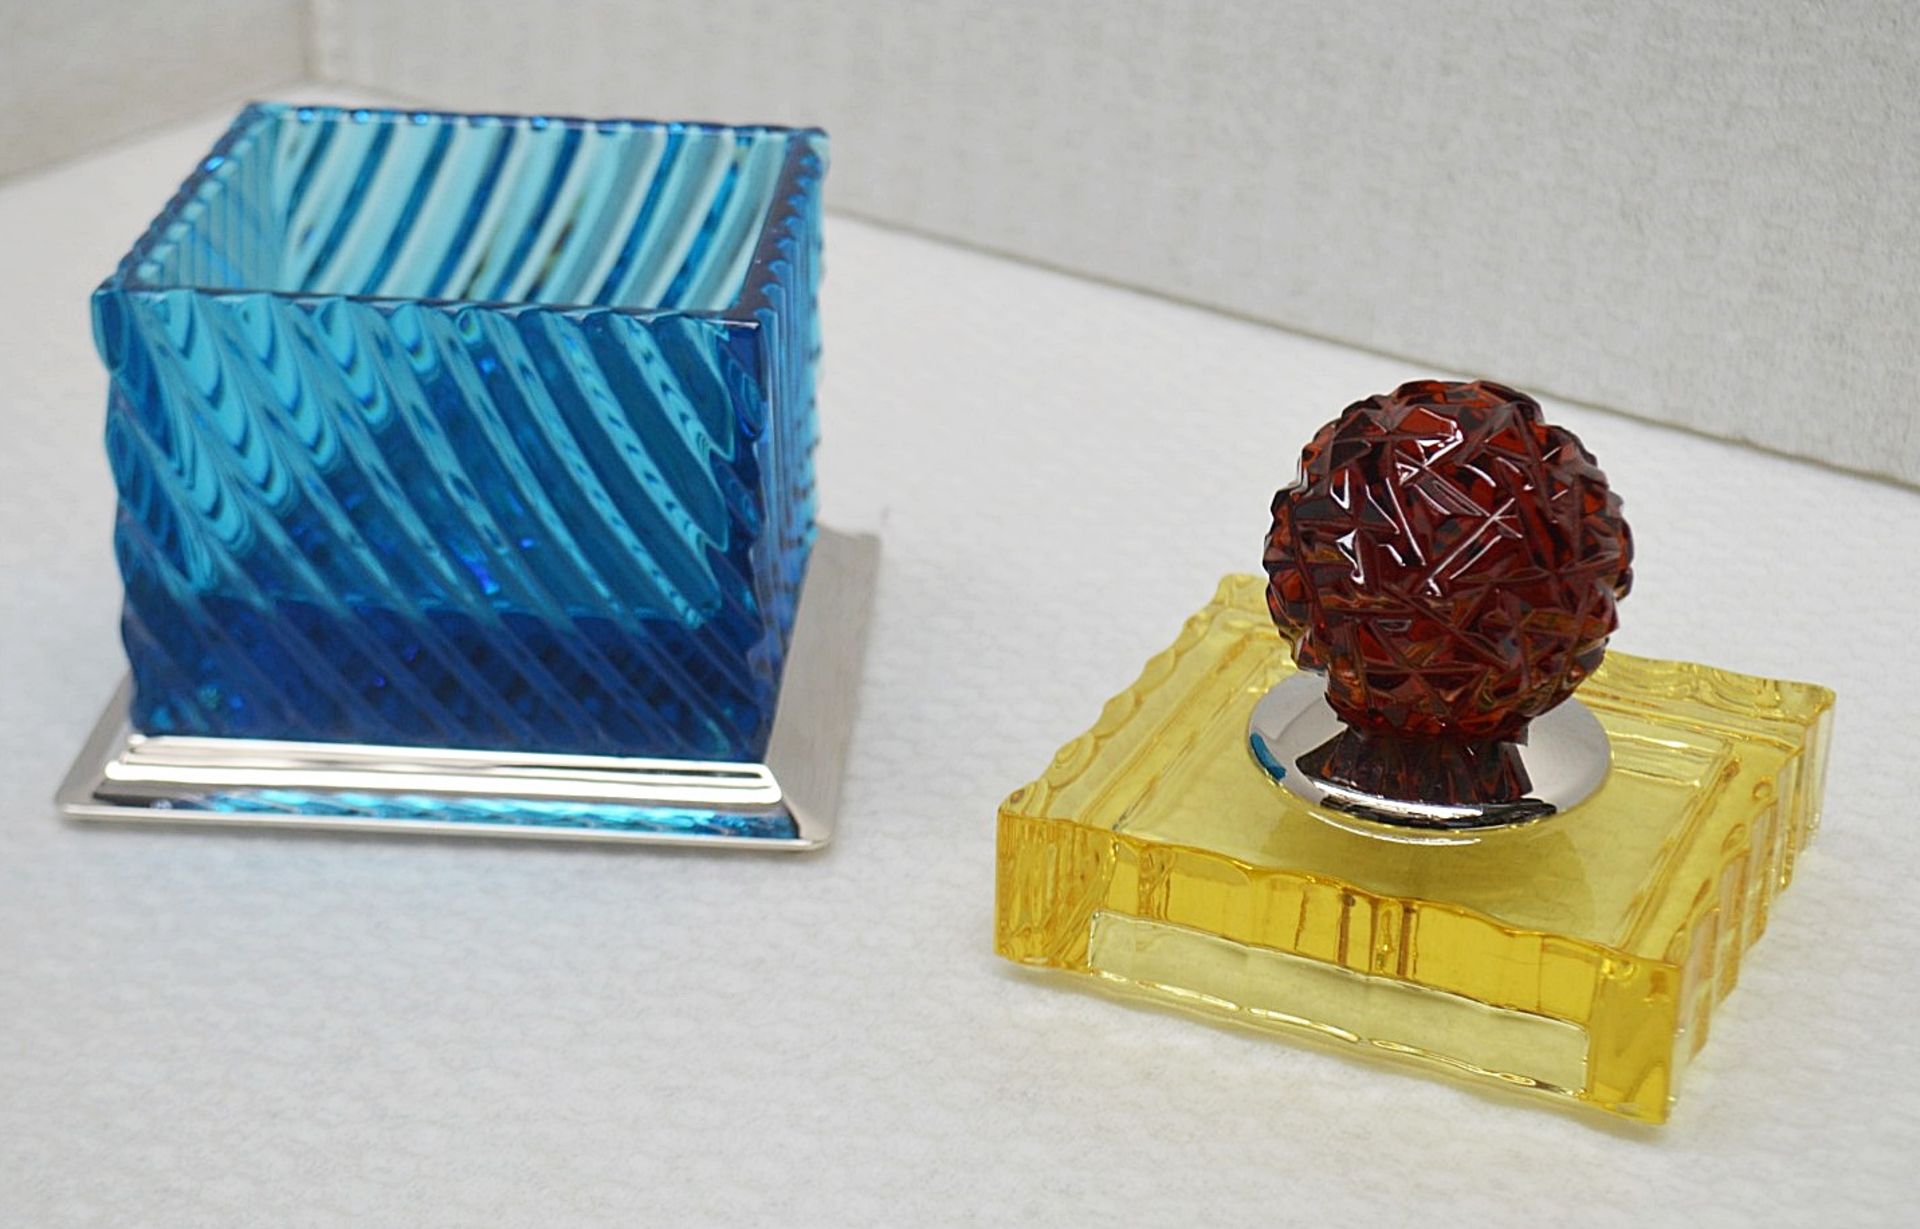 1 x BALDI 'Home Jewels' Italian Hand-crafted Artisan Crystal Box In Blue & Yellow, With A - Image 2 of 5